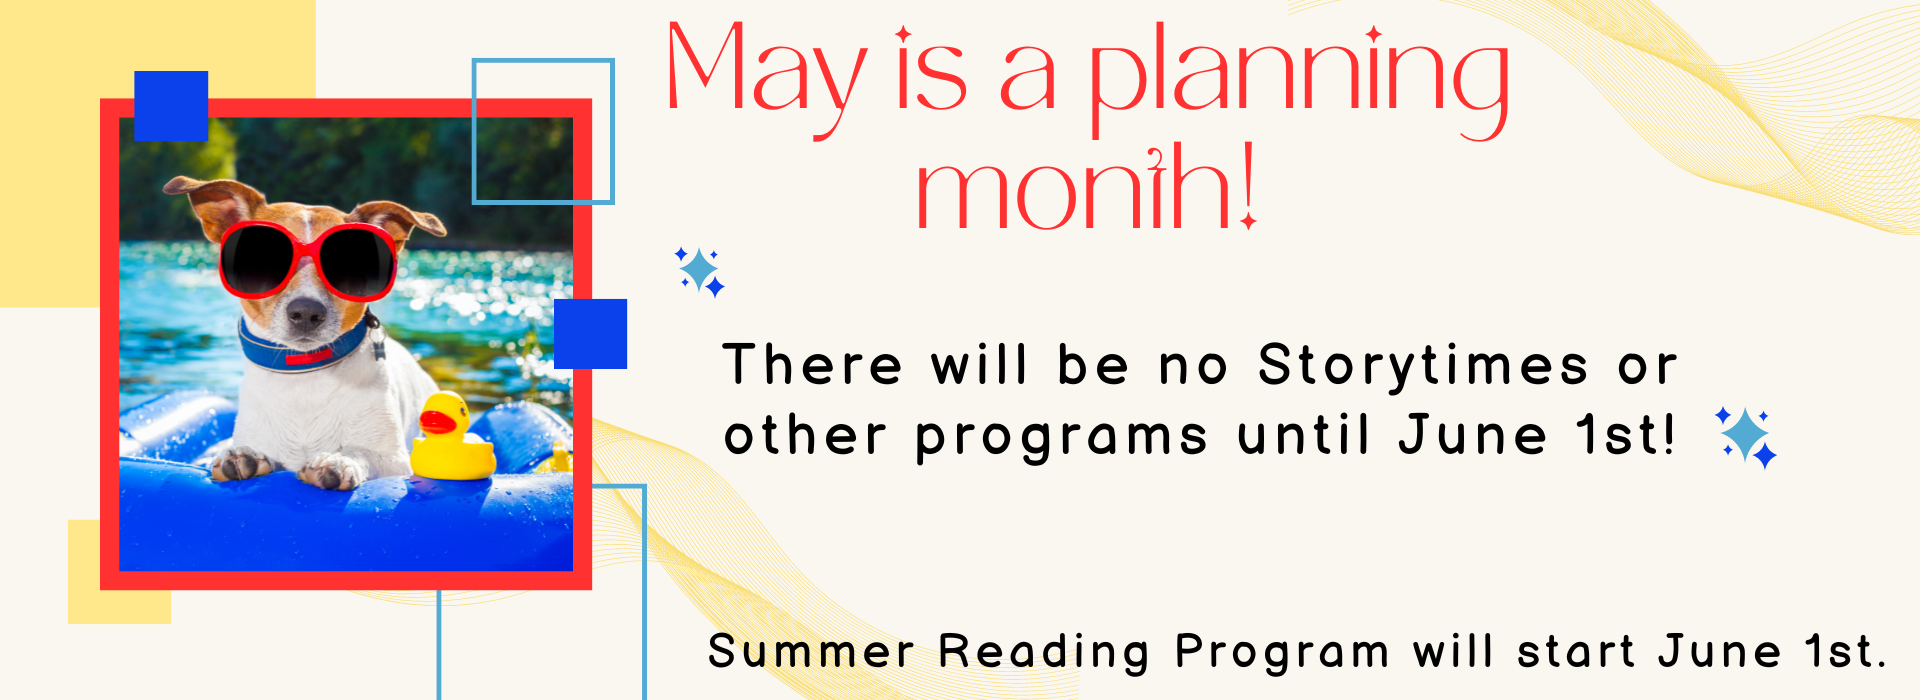 No programs during the month of May! Programs start again June 1st.